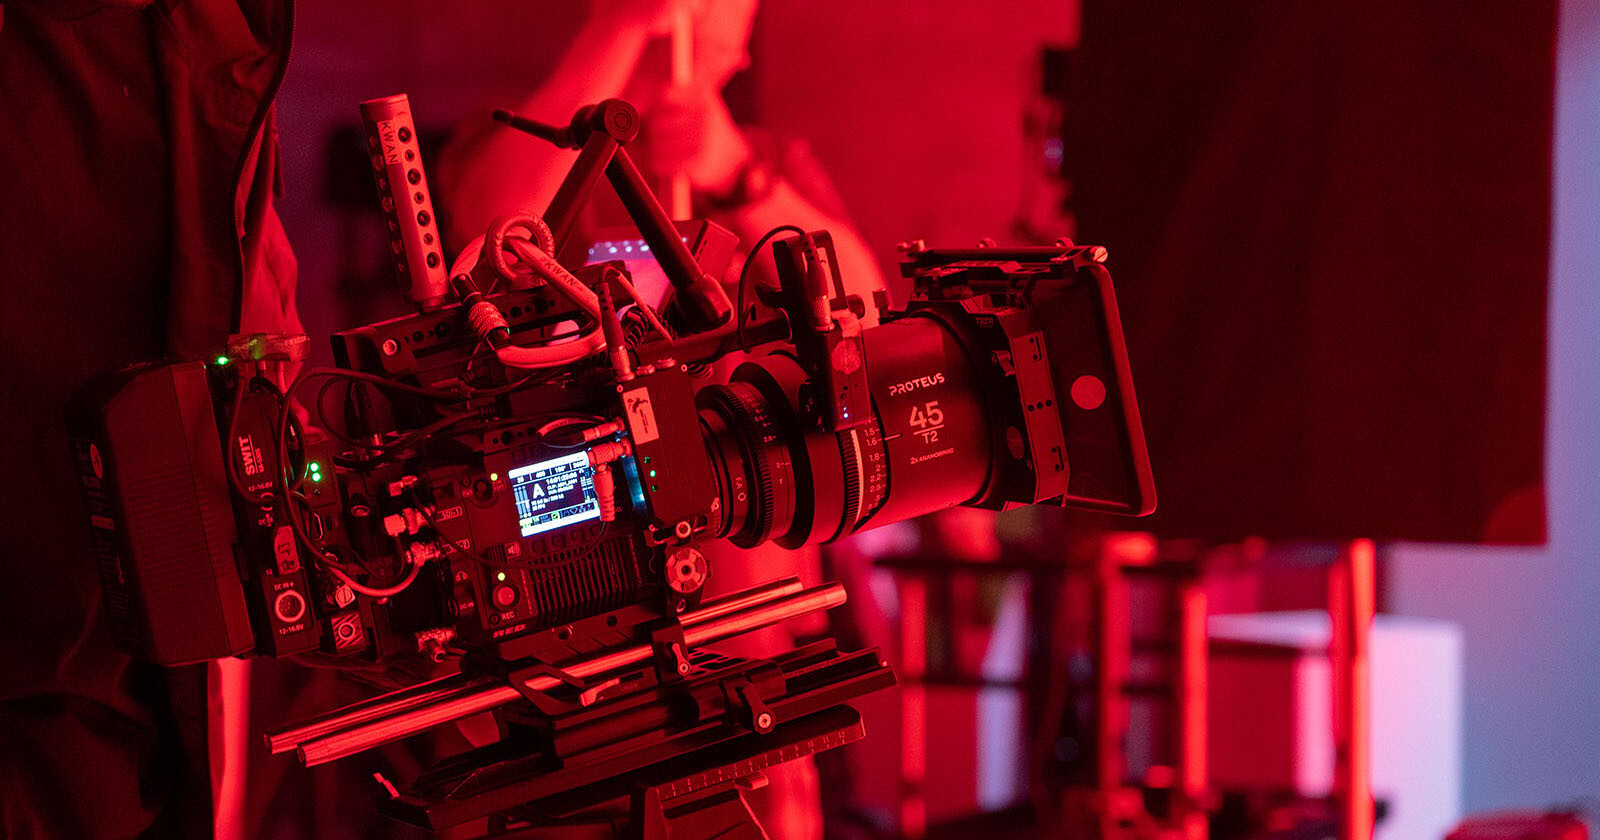 Laowas Four New Anamorphic Lenses Include Widest-Ever for Super35